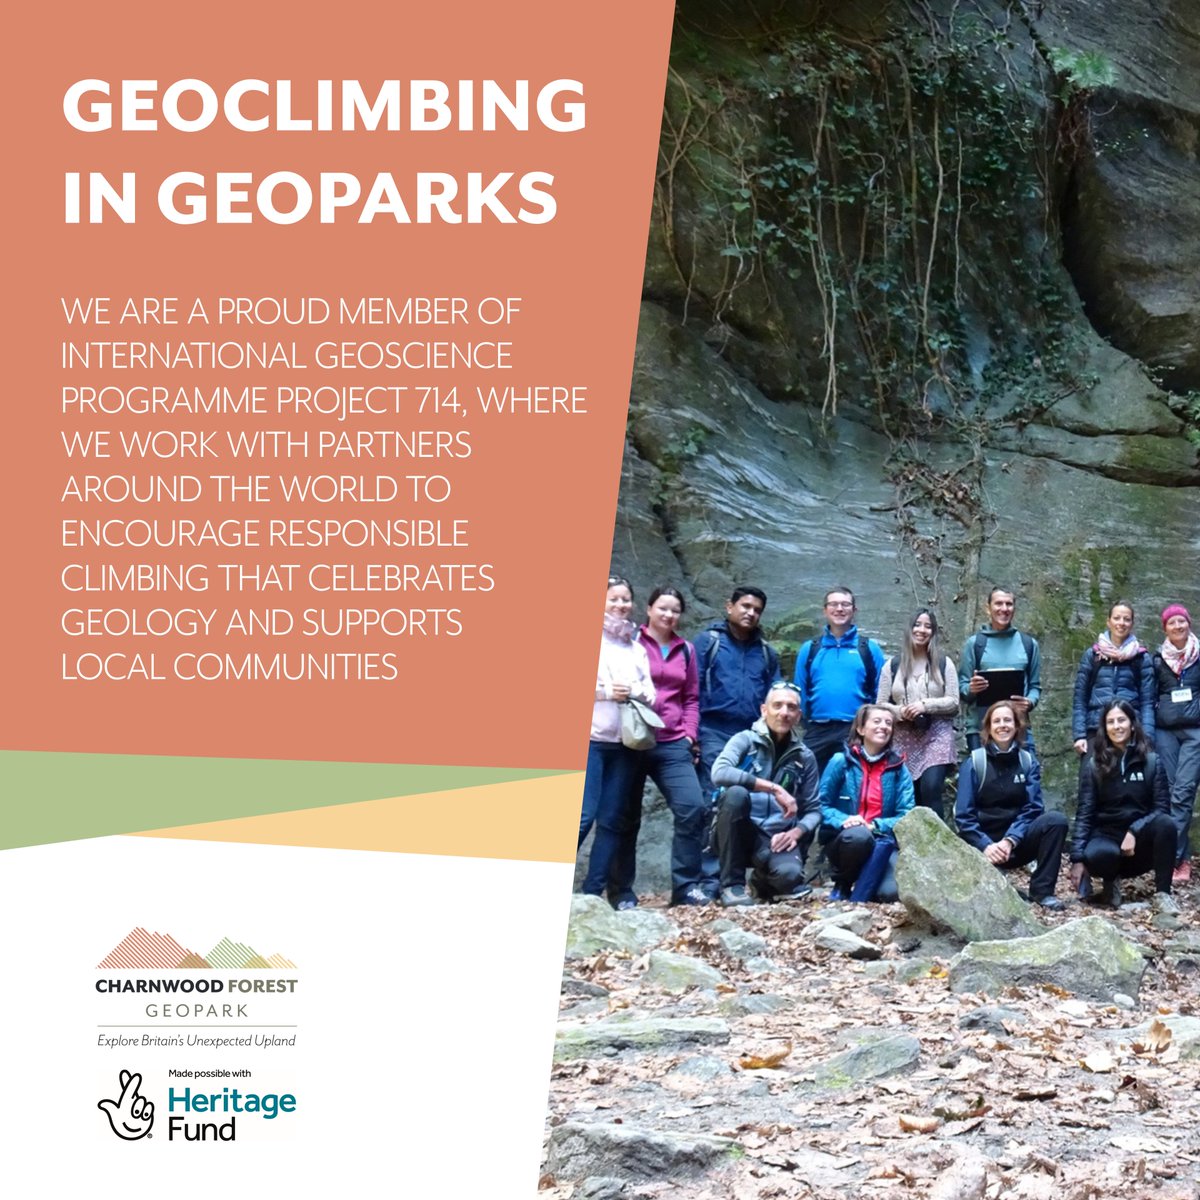 🌍 We're proud to be part of International Geoscience Programme Project 714, which supports the promotion of geoclimbing in geoparks.

🧗 By learning from our friends around the world we can have more climbing opportunities, better conservation, and stronger local economies.